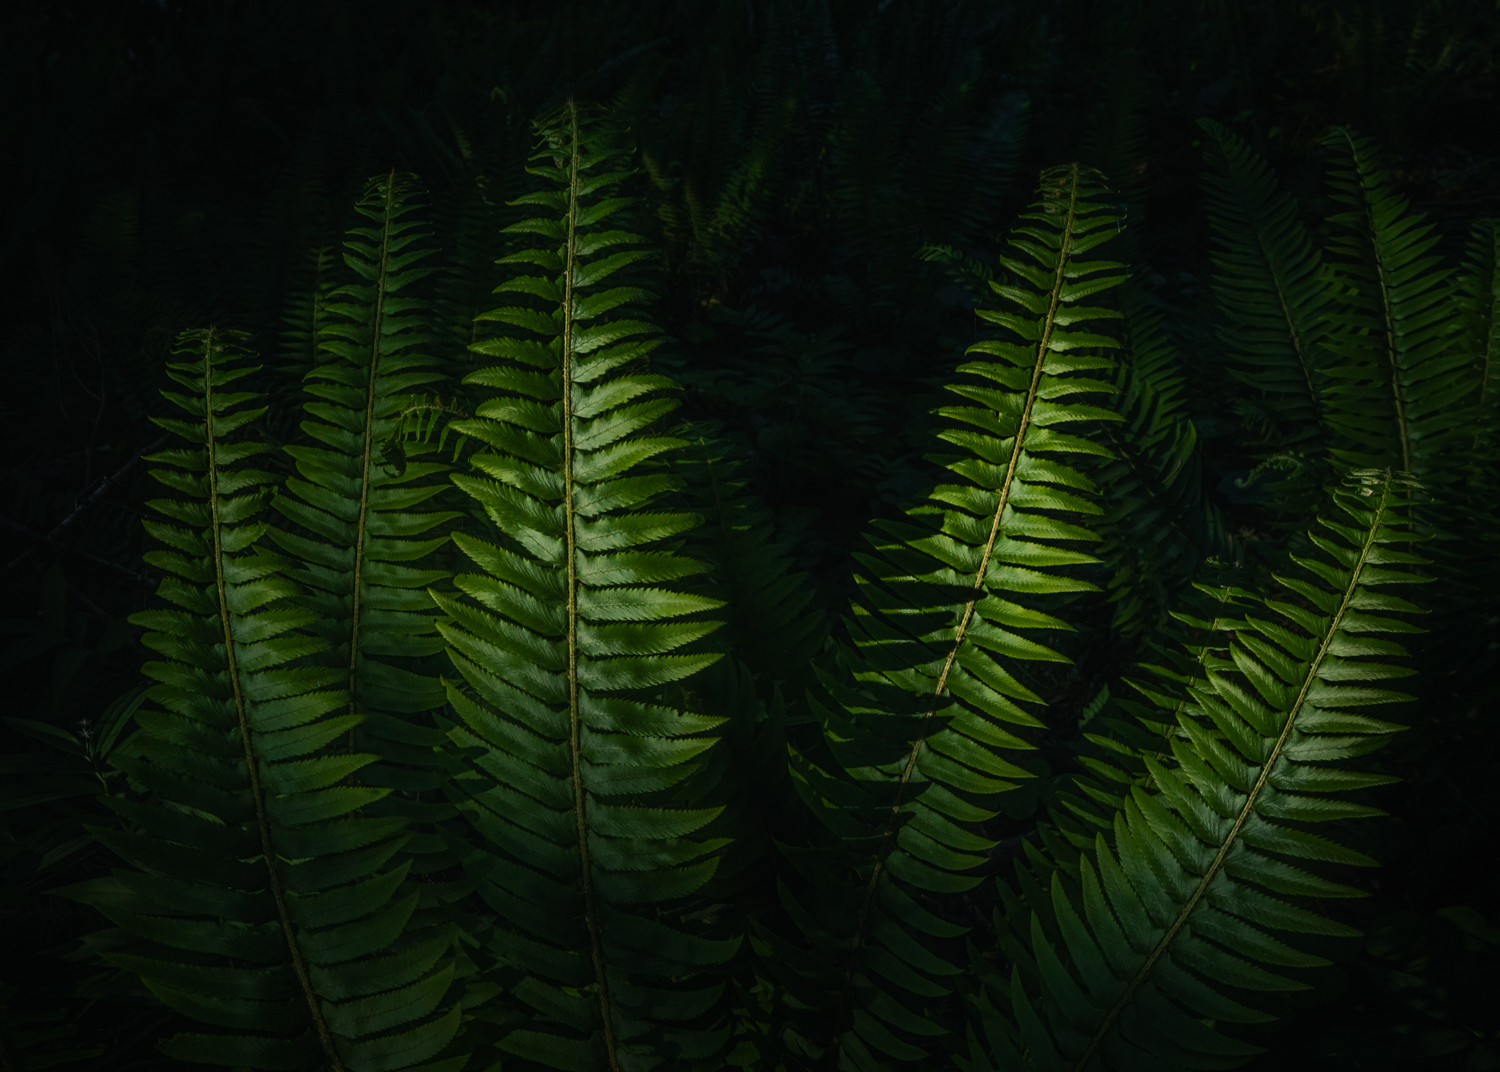 Final moments of sunlight illuminate a patch of sword ferns at a forest in Oregon